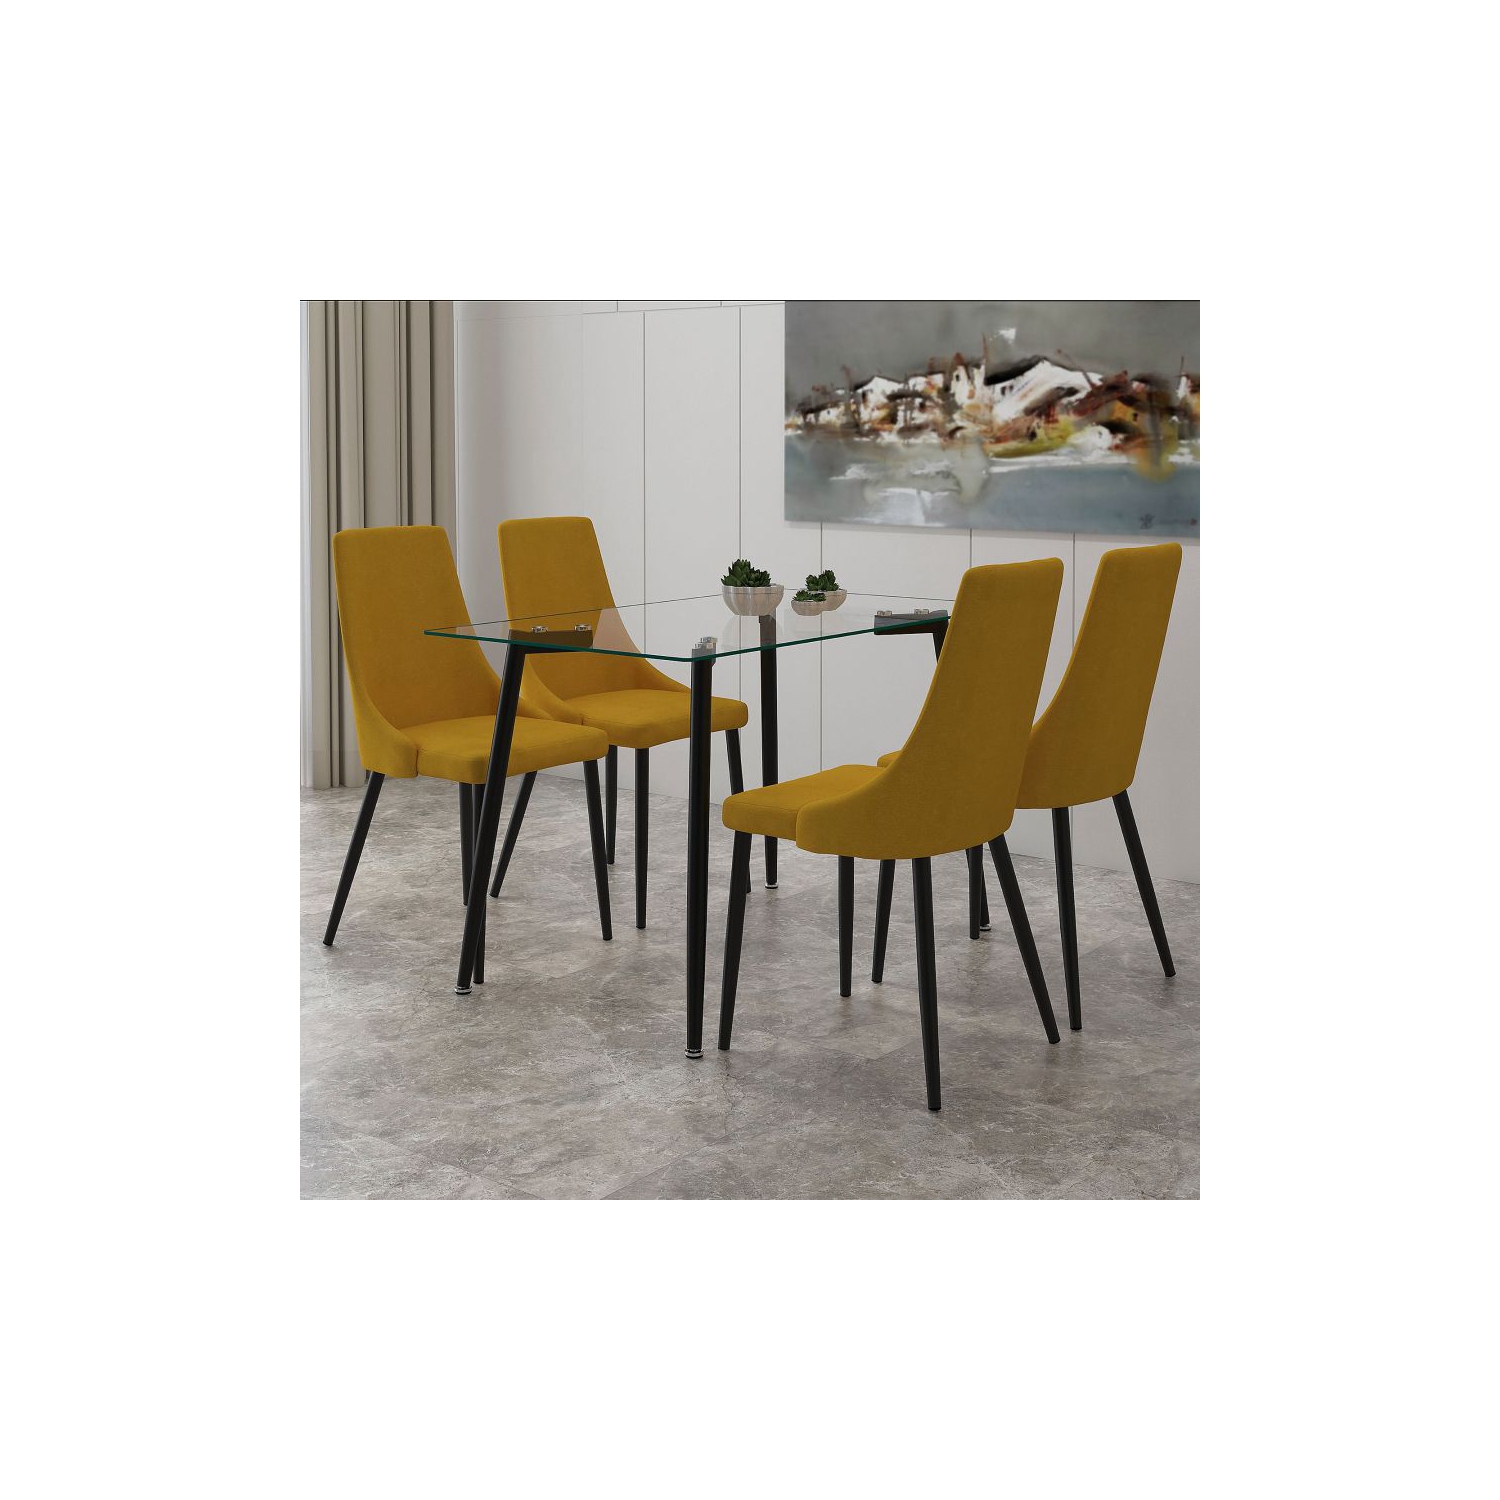 Cosmic Homes 5pc Dining Set in Black with Mustard Chair, Modern Mid-century Dining Set of 4, Glass Top and Mustard Chairs Dining Table Set, Contemporary Style